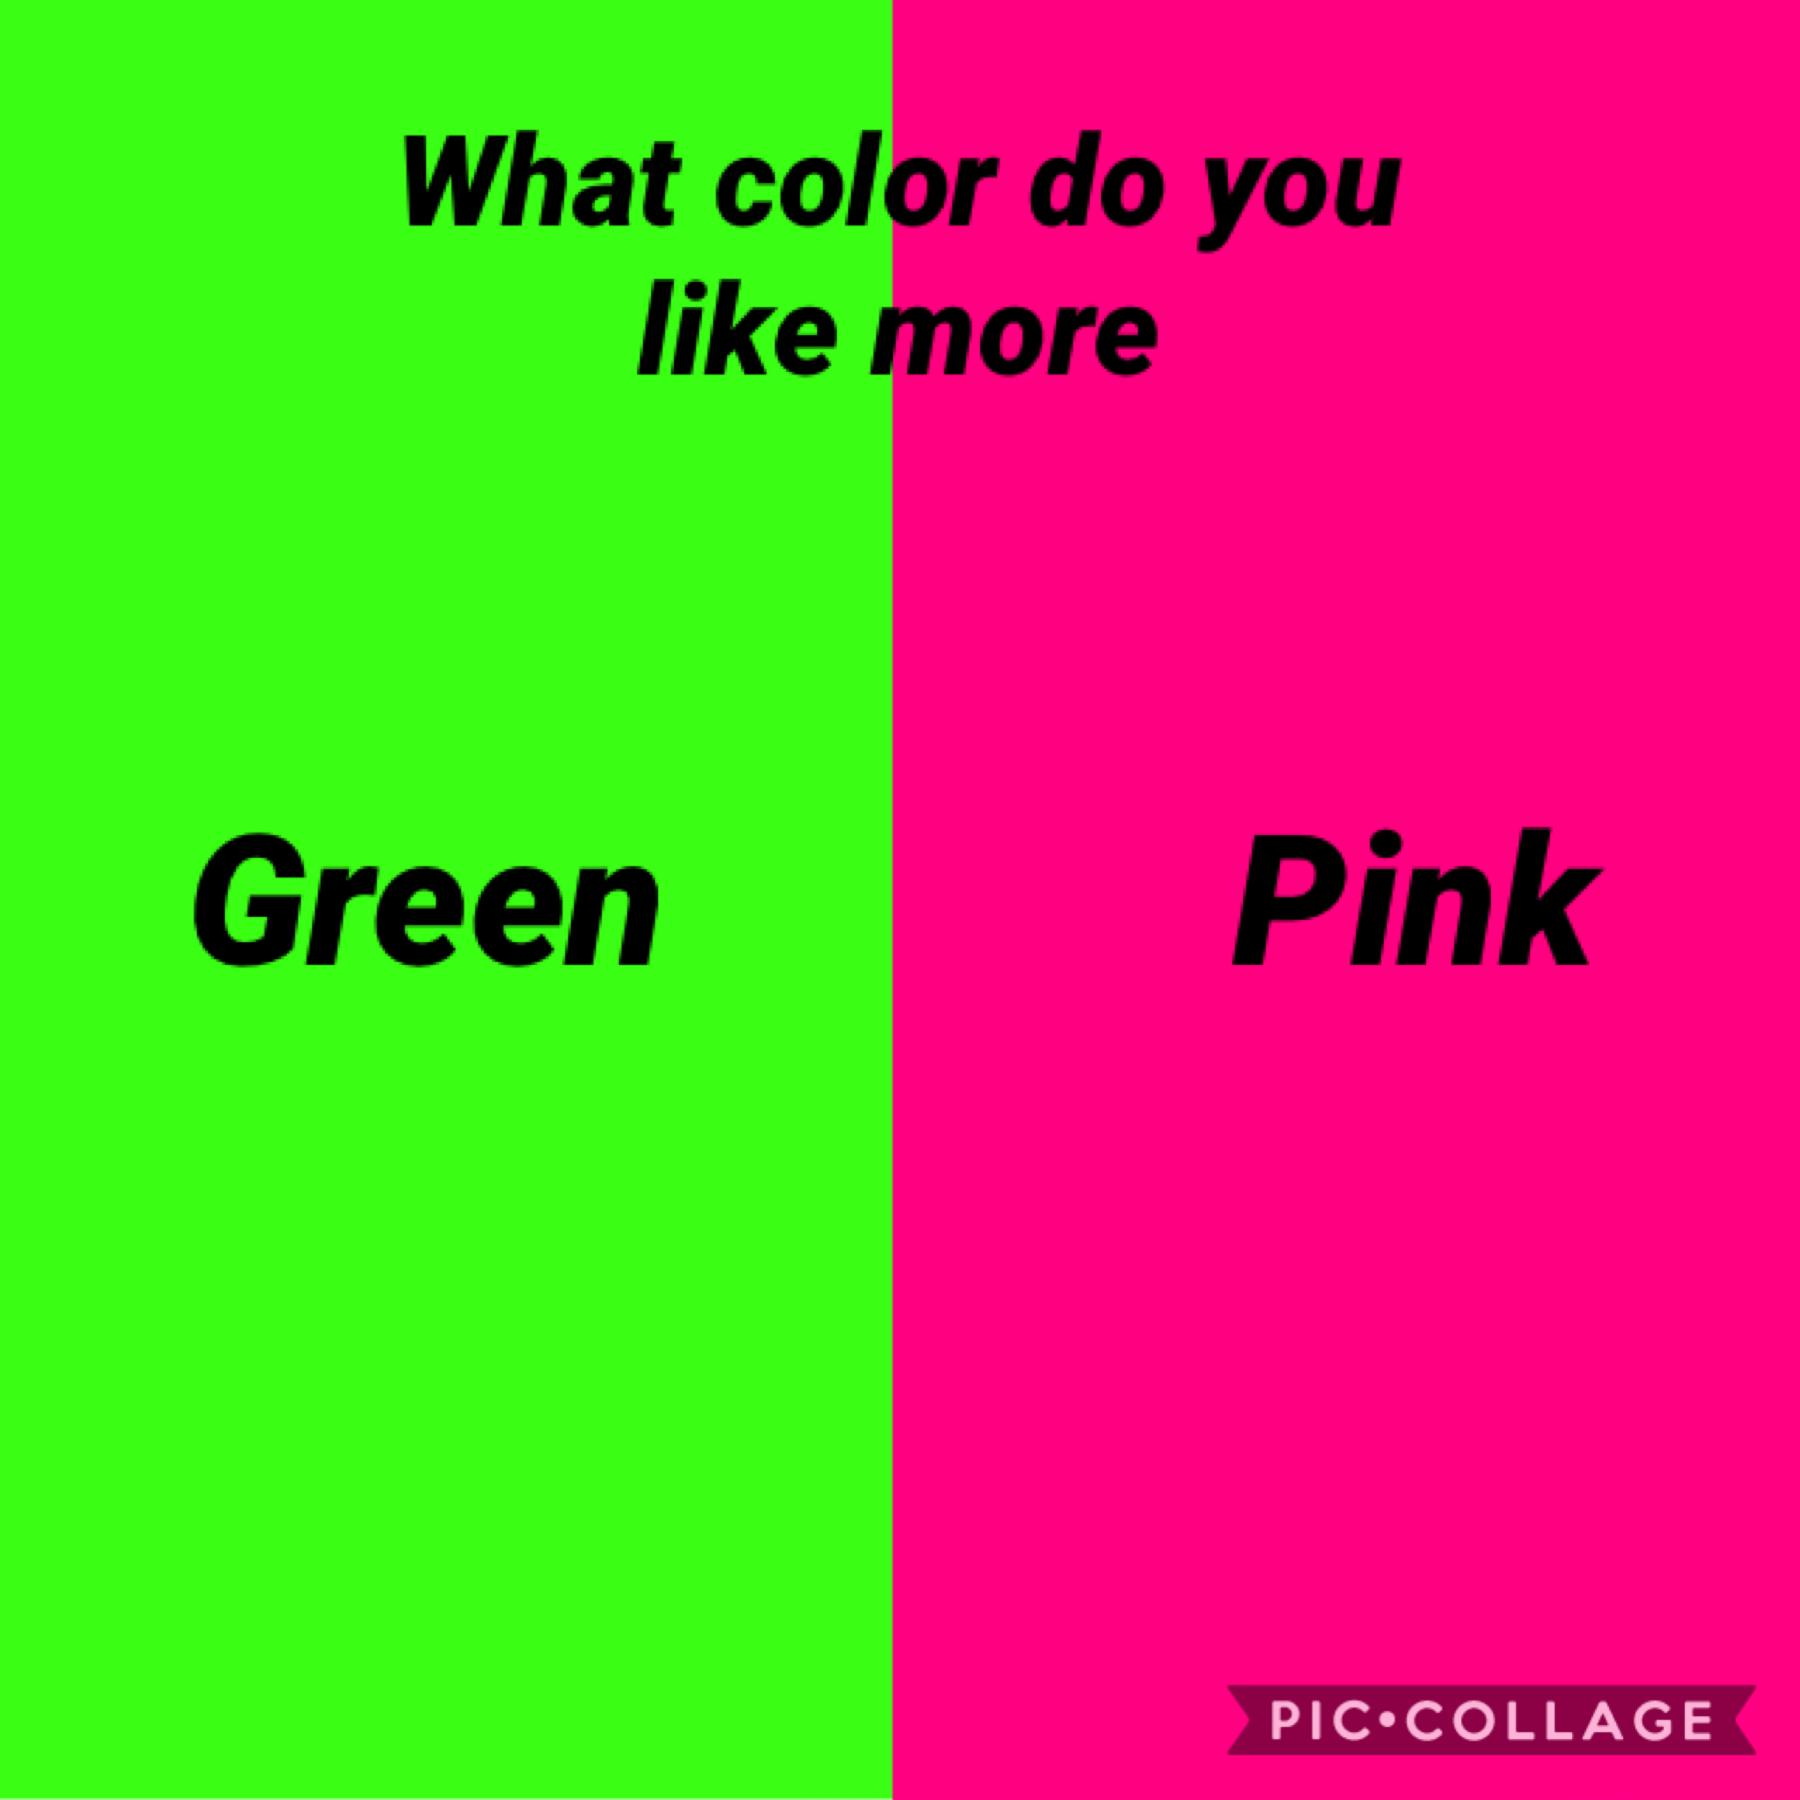 What color do you like more